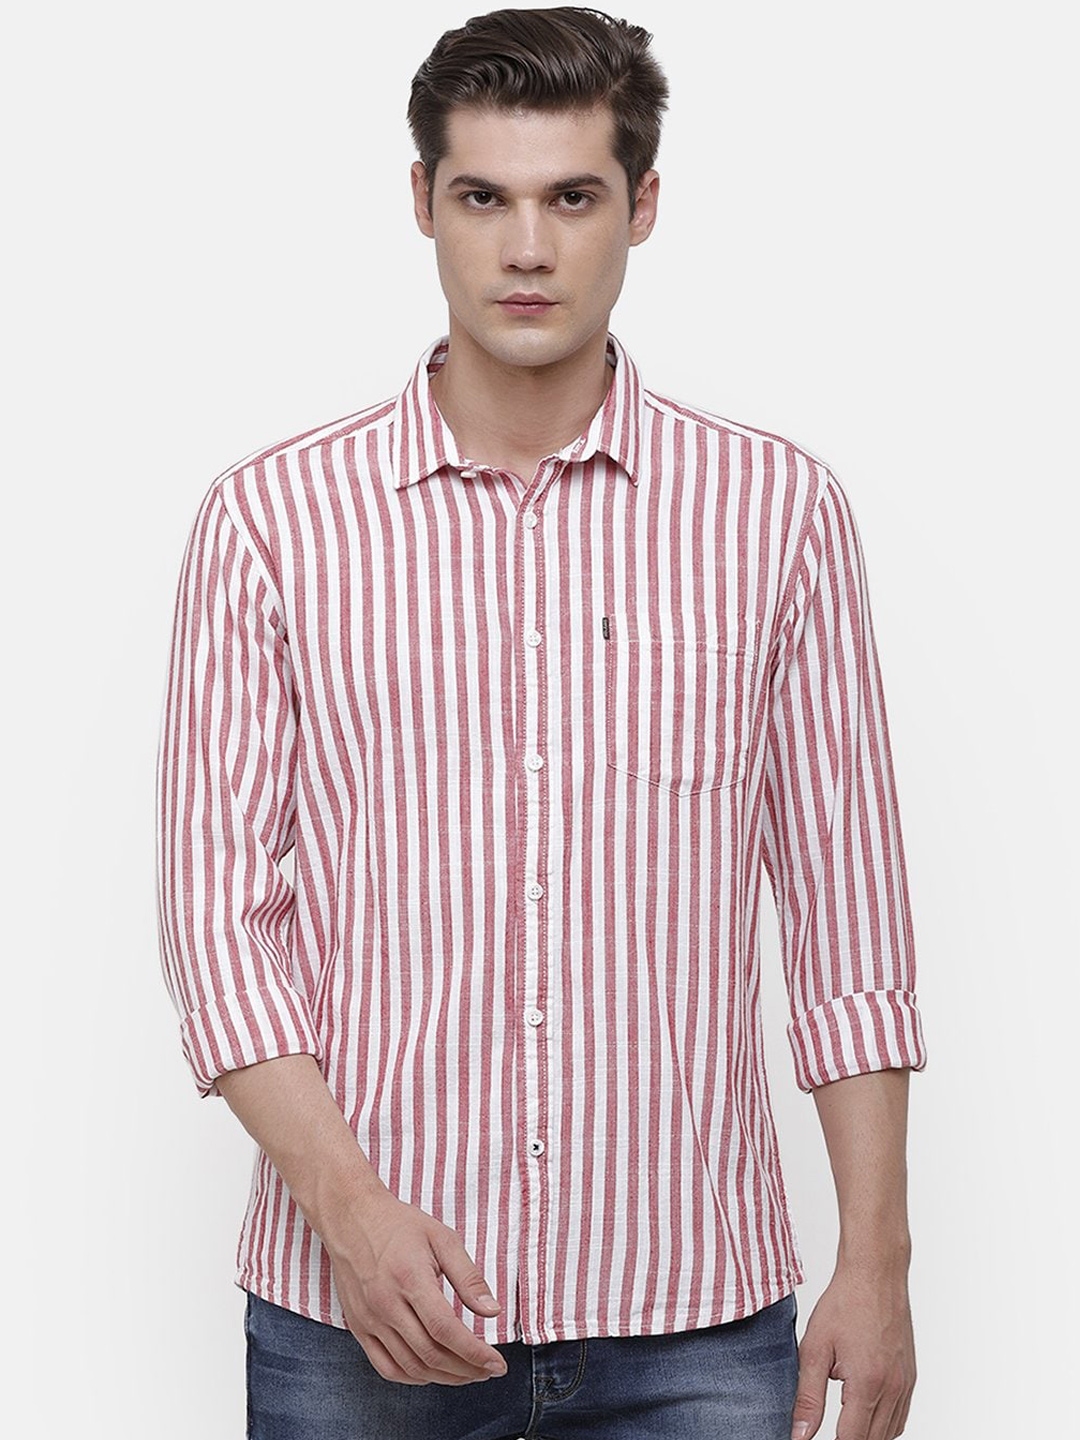 Buy Voi Jeans Men Red & White Slim Fit Striped Casual Shirt - Shirts ...